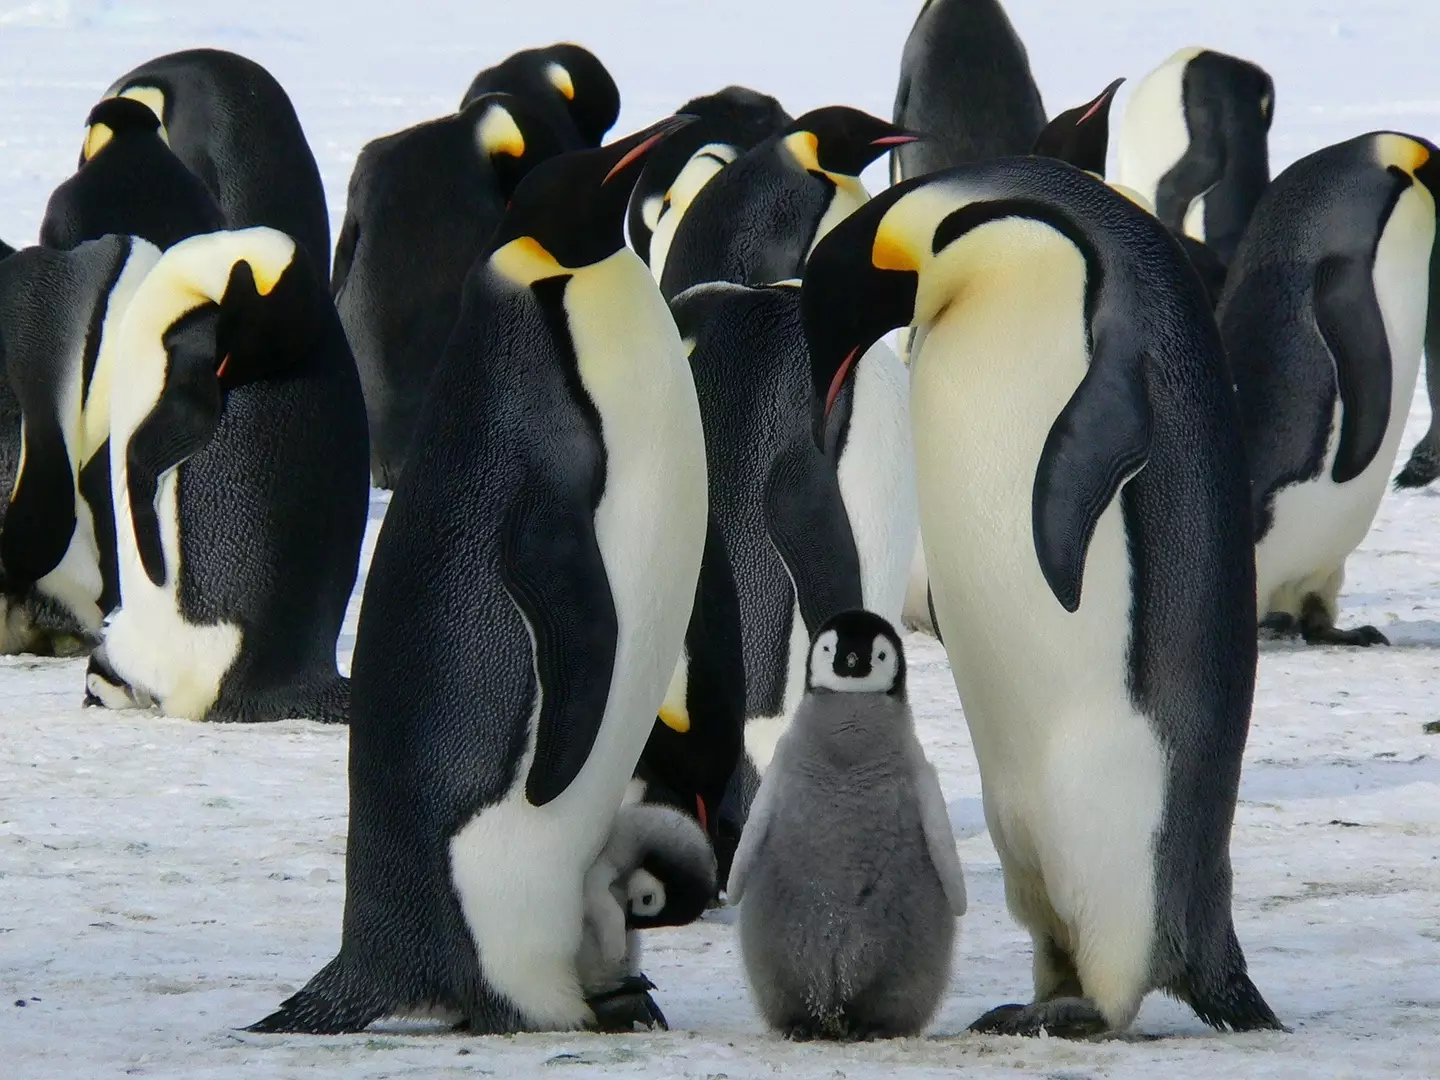 Penguins are typically considered very cute animals.